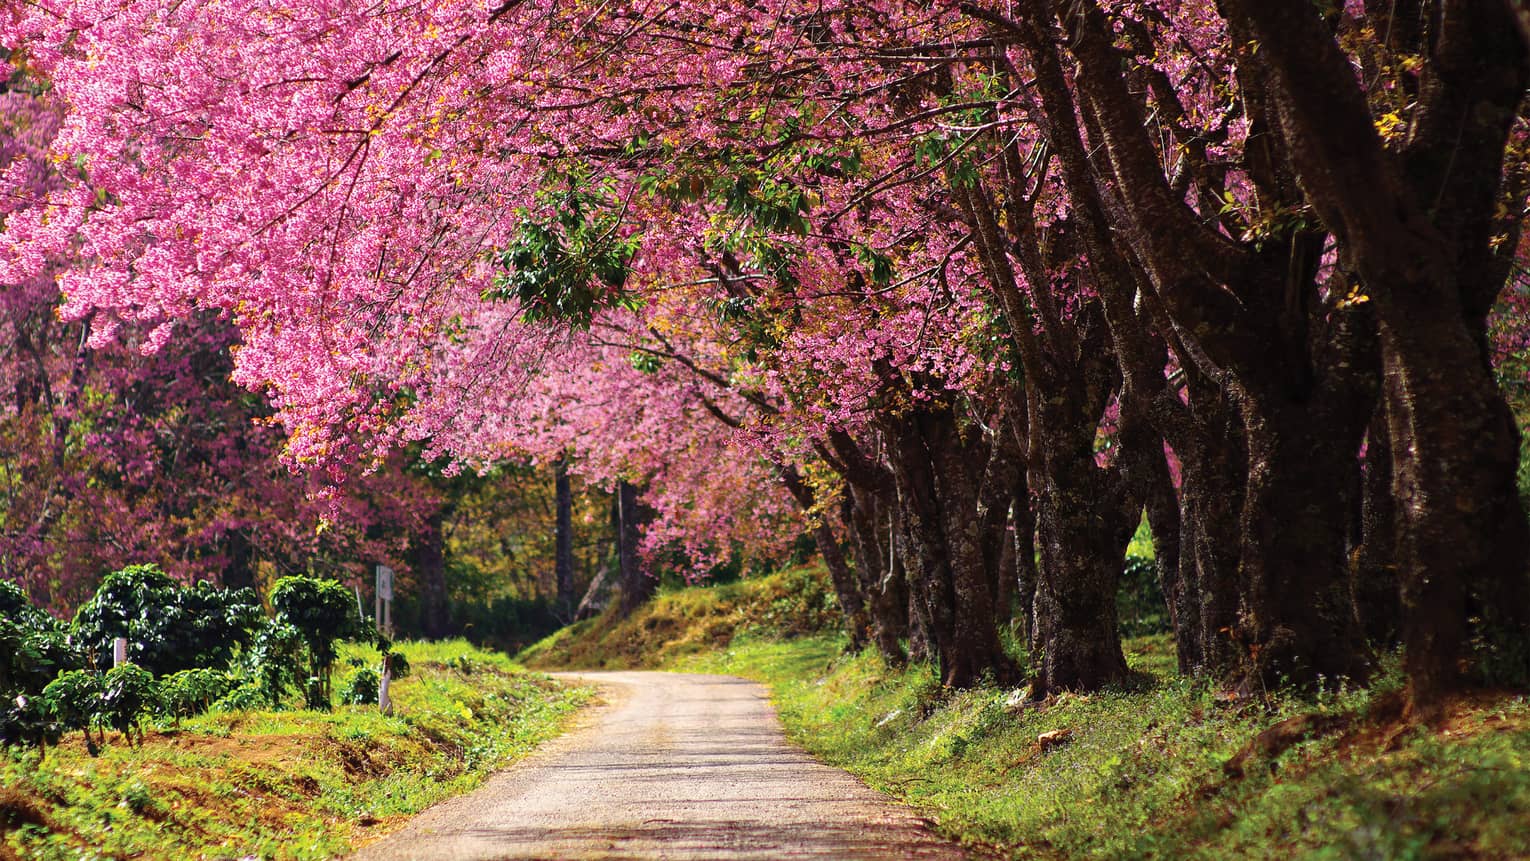 Nature trail under row of large trees with canopy of pink blossoms